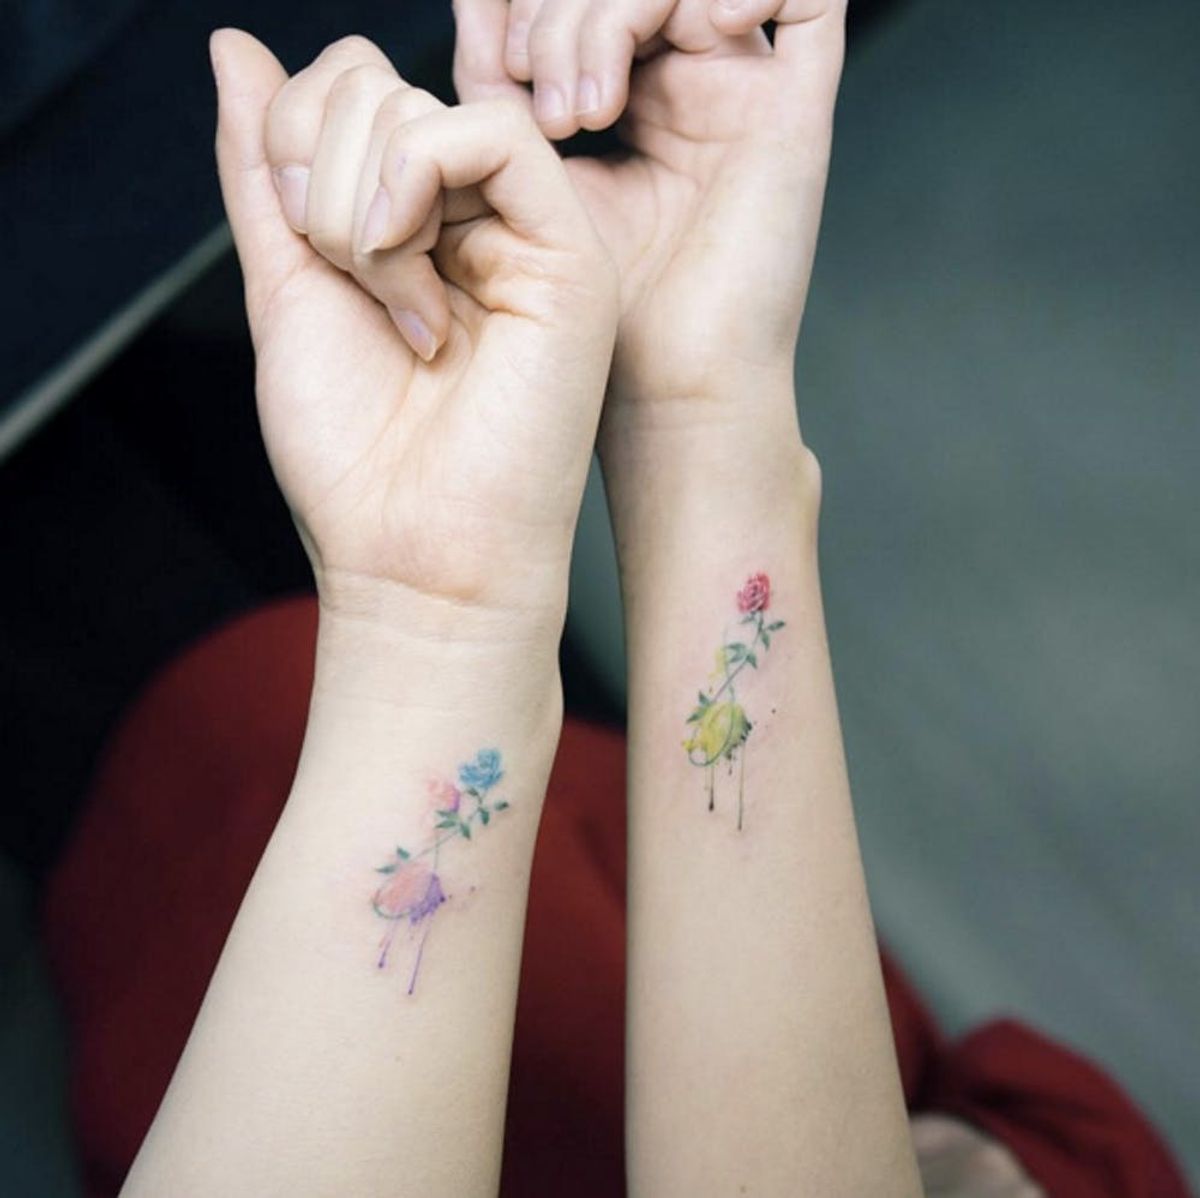 16 Best Friend Tattoos to Show Off Your Squad Love